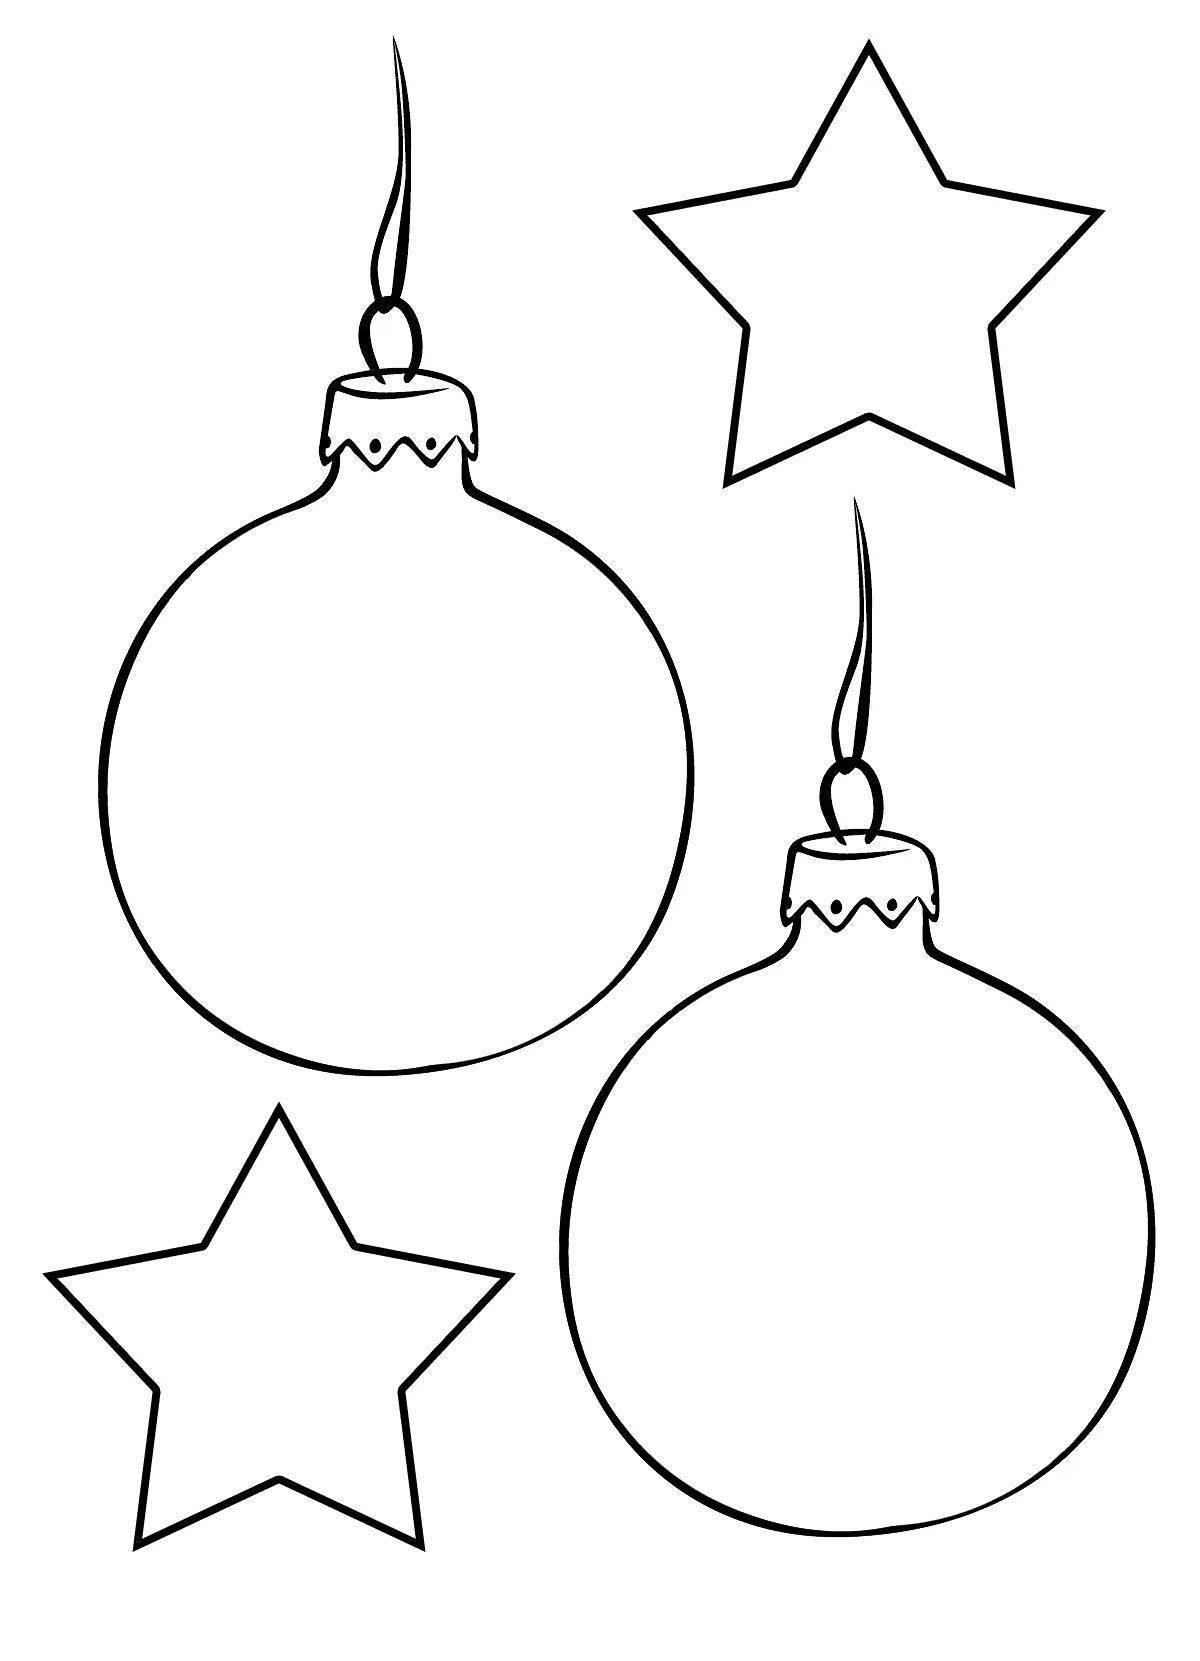 Exciting Christmas ball coloring book